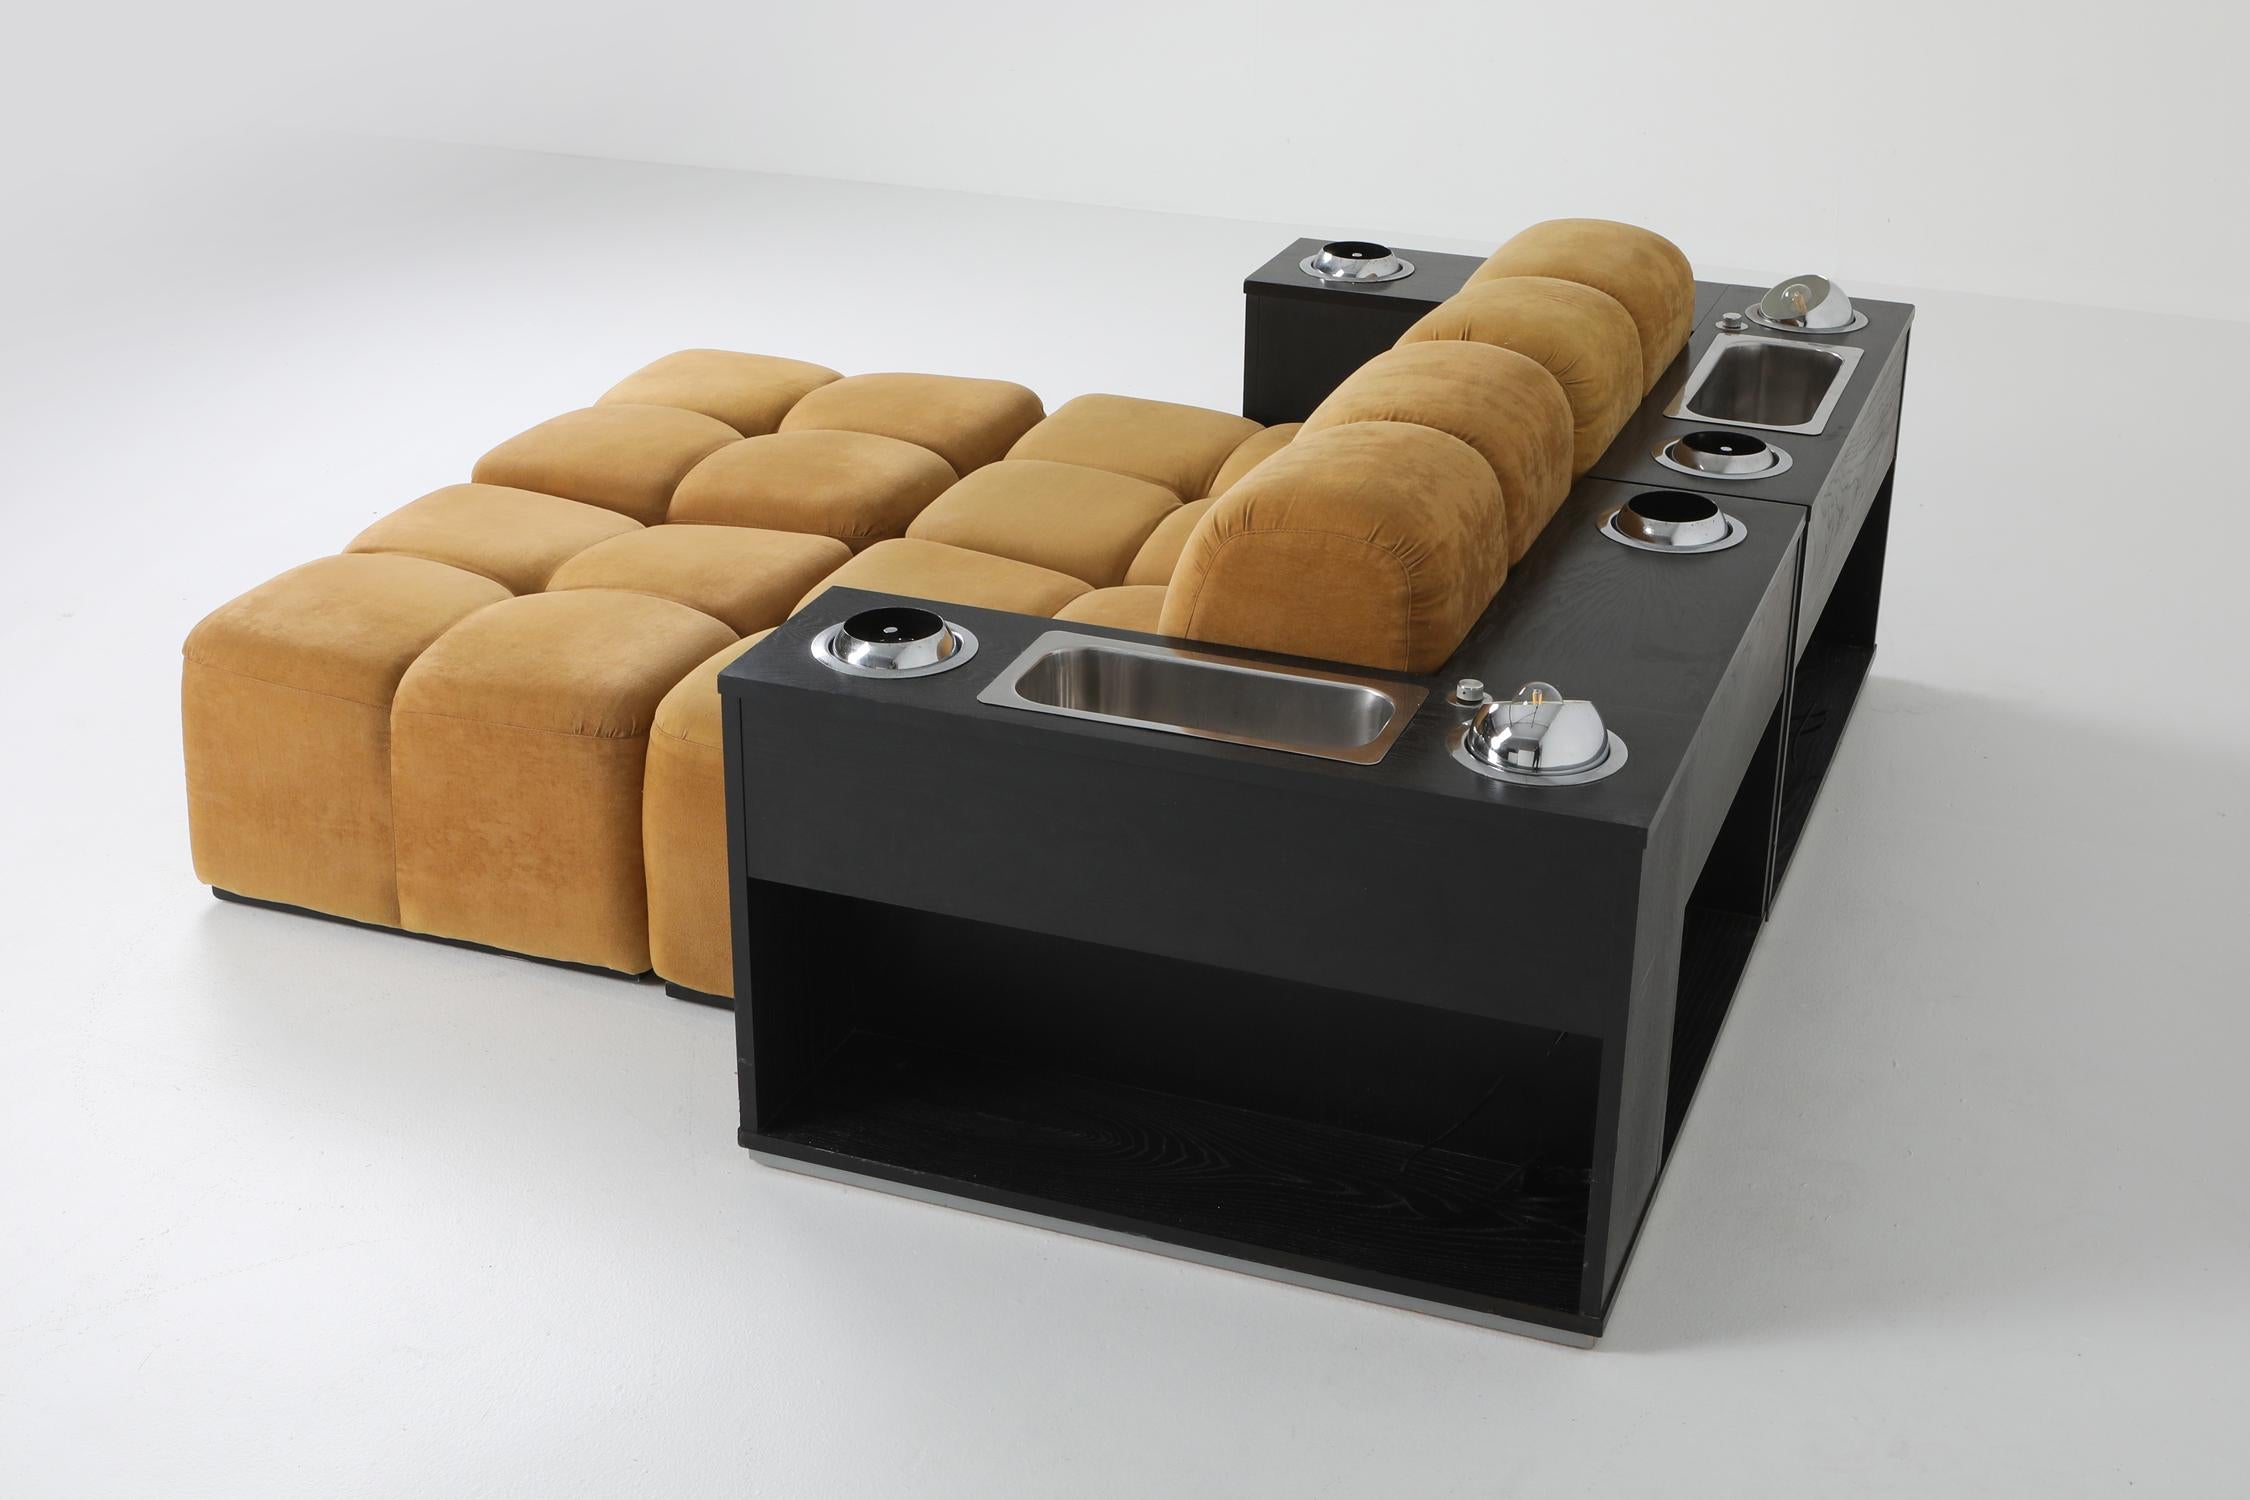 Tufted sectional sofa in the style of Mario Bellini's Camaleonda

Postmodern modular couch which could also be set up as two lounge chairs.
Multi functional piece as each ebonies oak module has two book storage facilities and three chrome